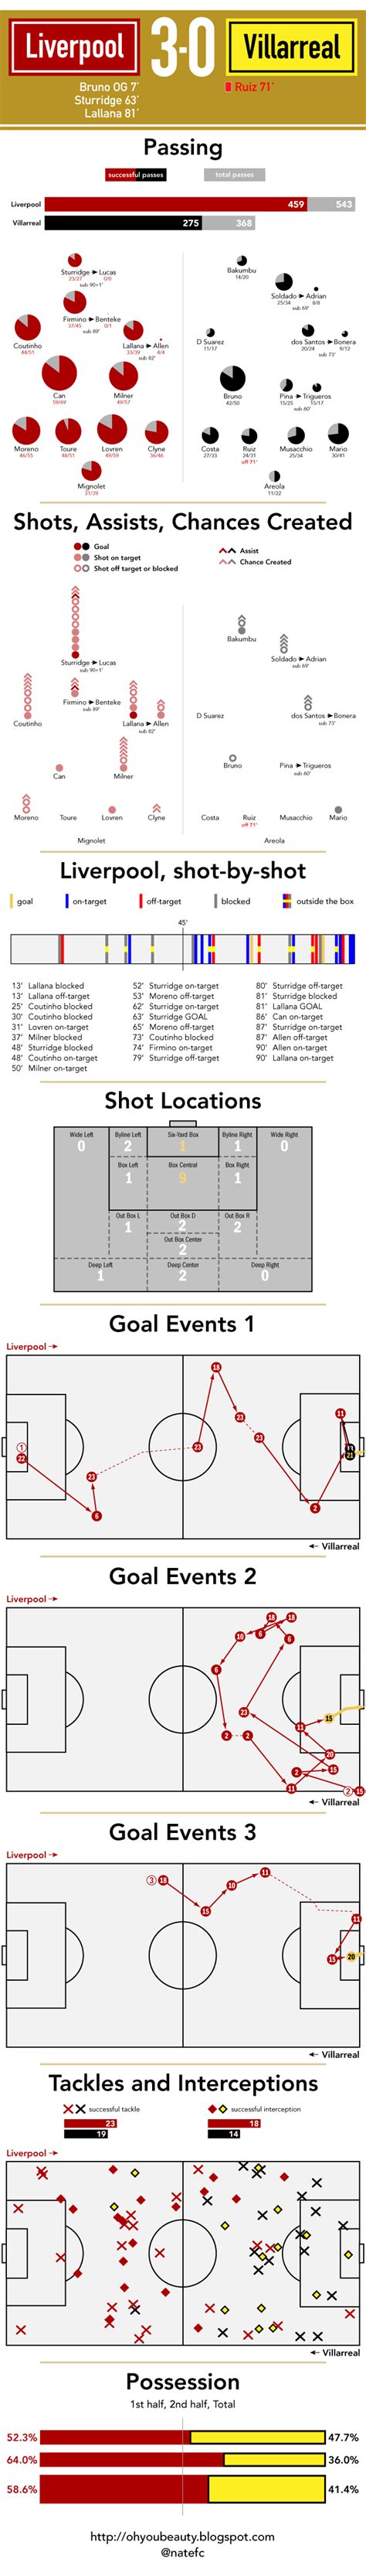 Legia warsaw & 73 mins, scoring once vs. Pin on Liverpool FC Infographic